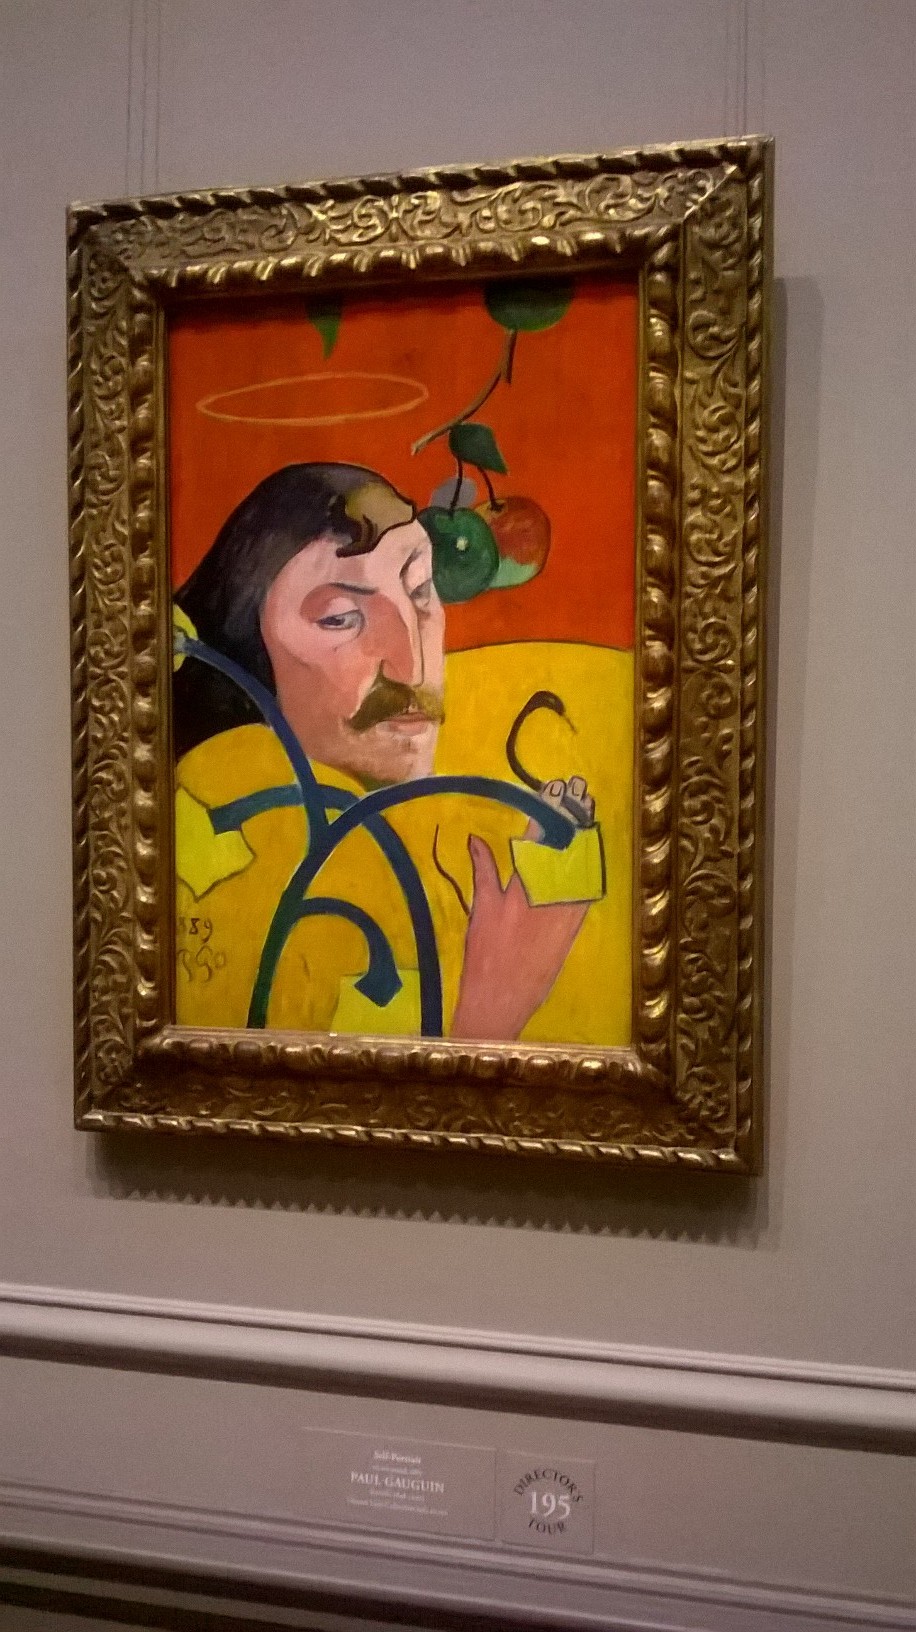 Self Portrait by Paul Gauguin@cita-spectre This seems like something you’d like